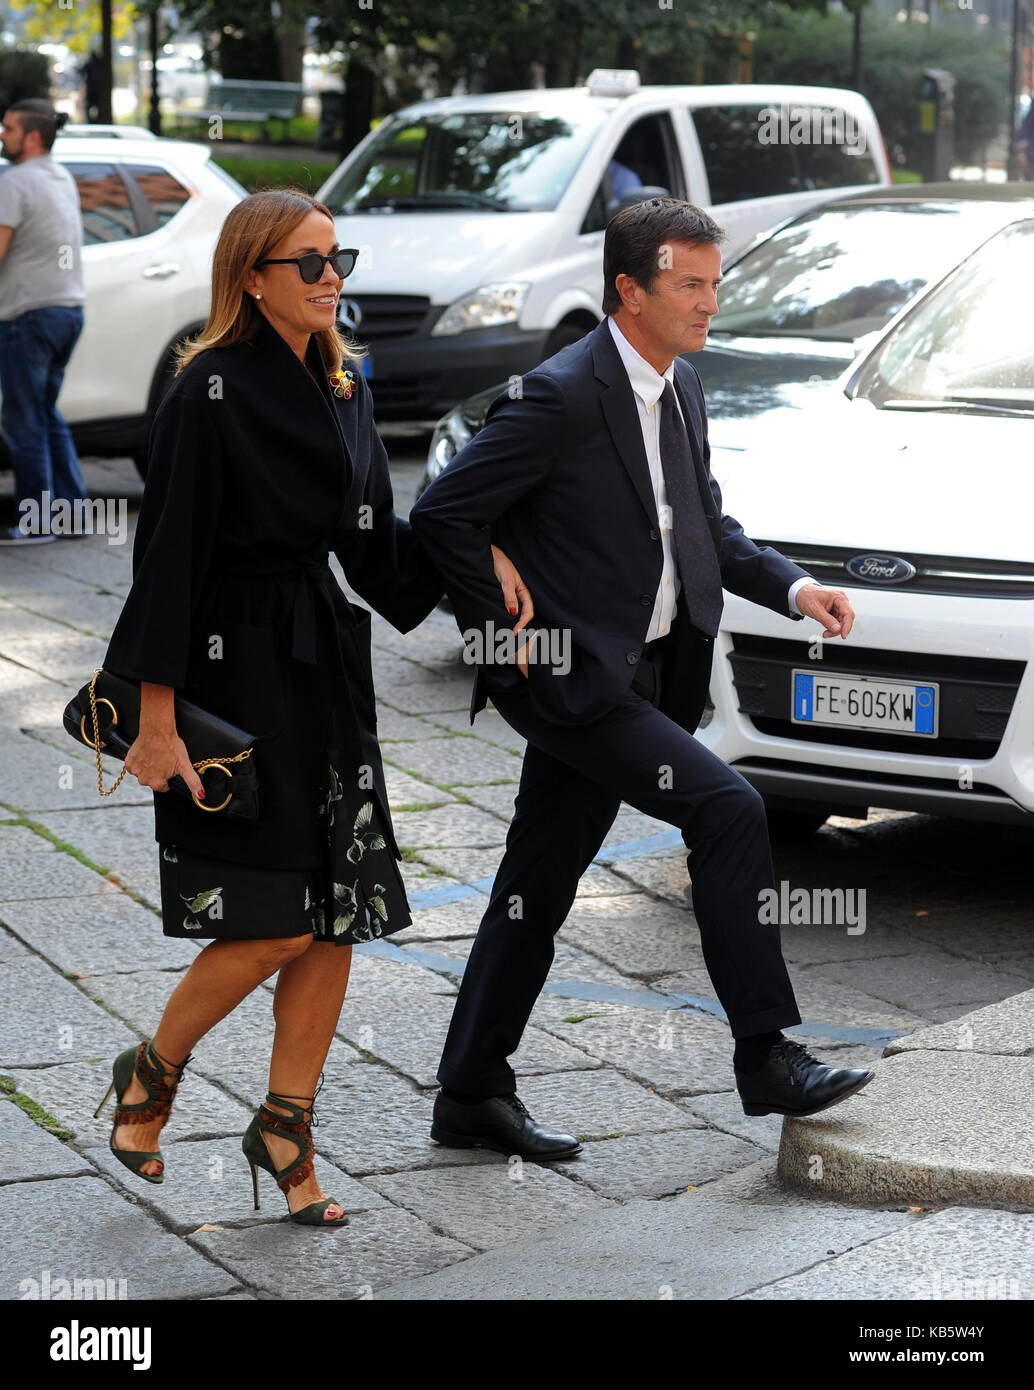 Milan, Cristina Parodi and her husband Giorgio Gori go to the Giornalismo Prize The Mayor of Bergamo Giorgio Gori arrives in advance and calls his wife Cristina Parodi to find out where she is. After a few minutes Cristina Parodi arrives by taxi, and the two hug and kiss, then come to the hotel to attend the Prize is Journalism. Also sister Benedetta Parodi was present, with whom she ate at the buffet. Stock Photo